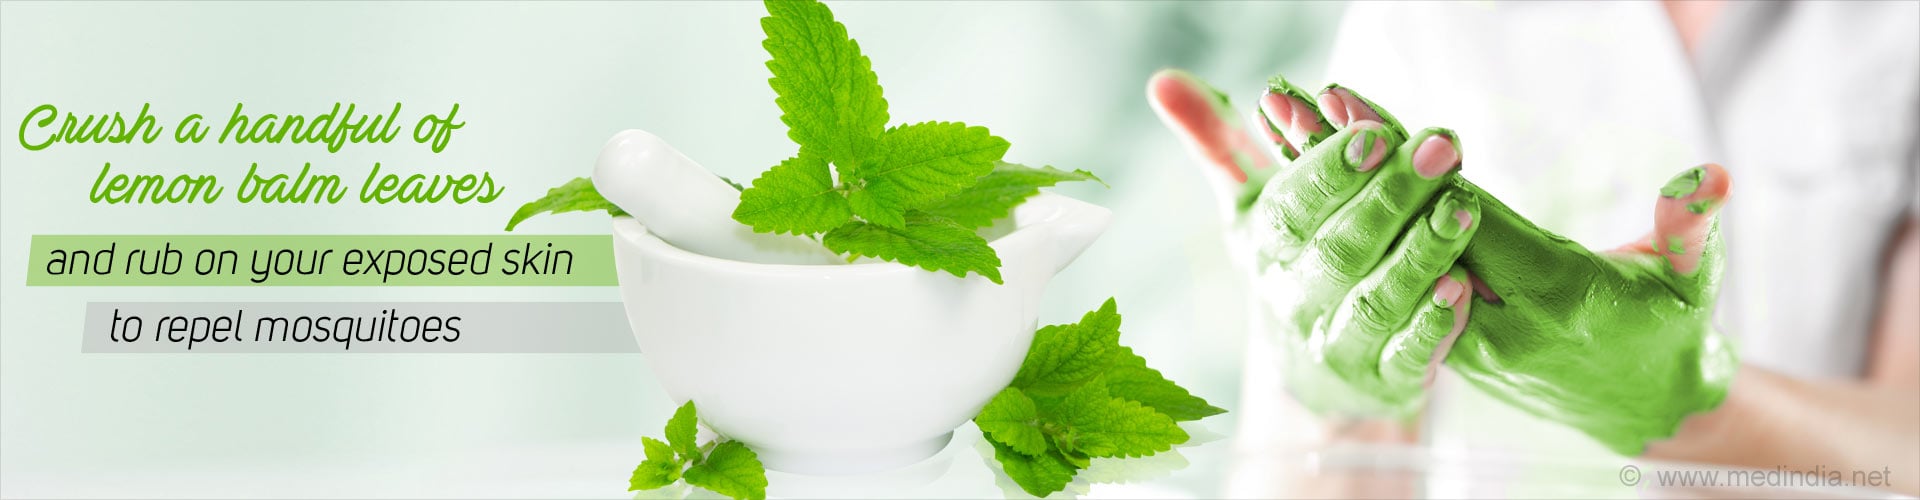 Crush a handful of lemon balm leaves and rub on your exposed skin to repel mosquitoes